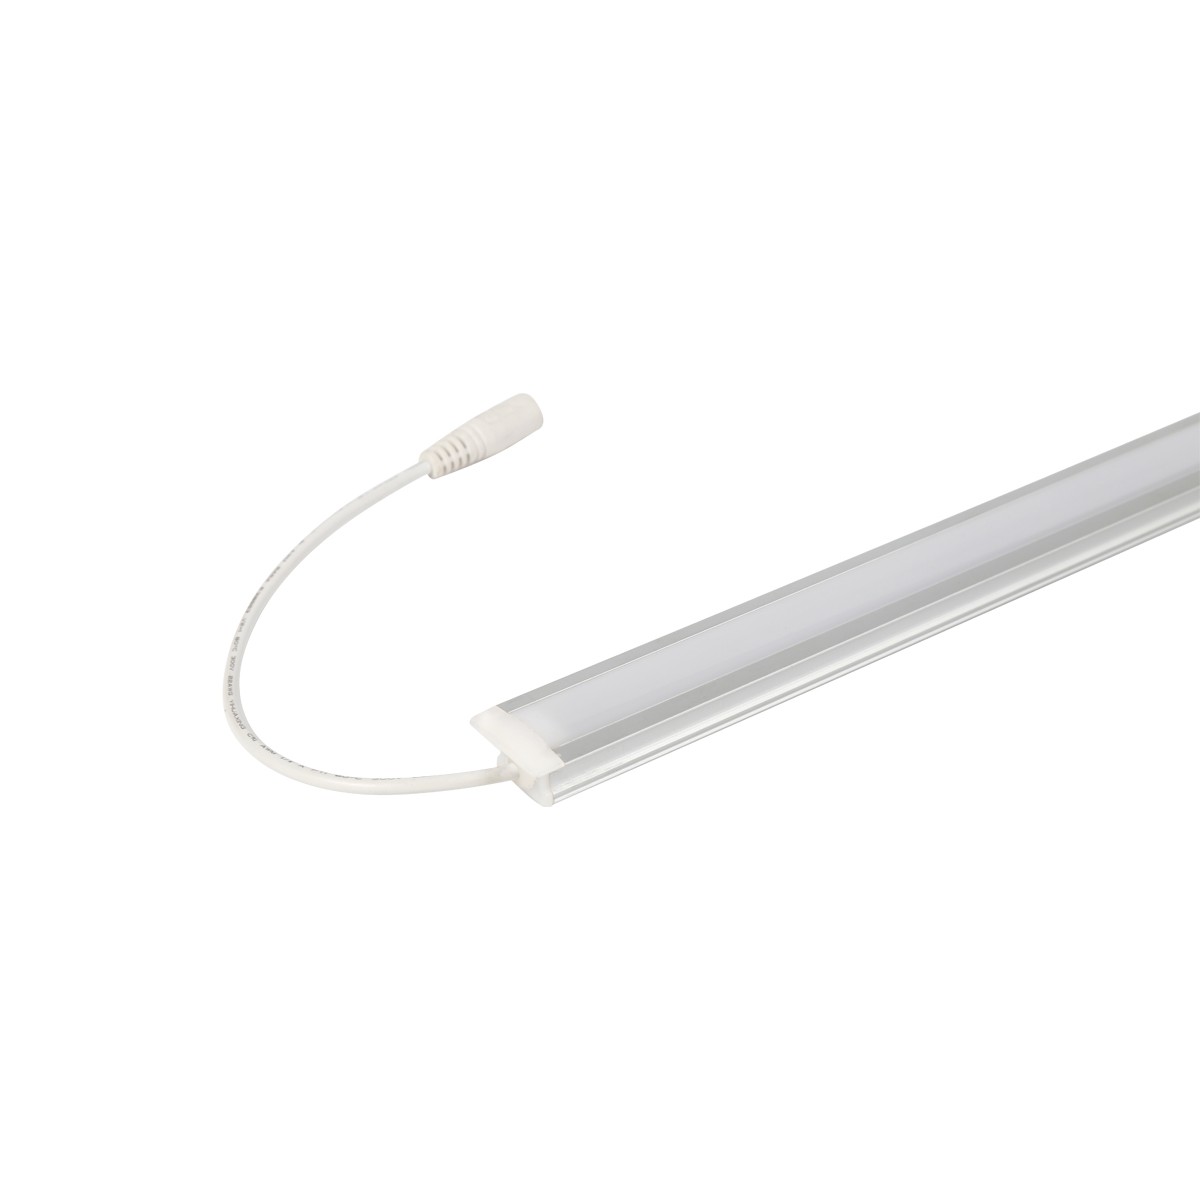 Built-in led linear lamp 5050 for hotel wardrobe with indoor and outdoor decoration led hard light b